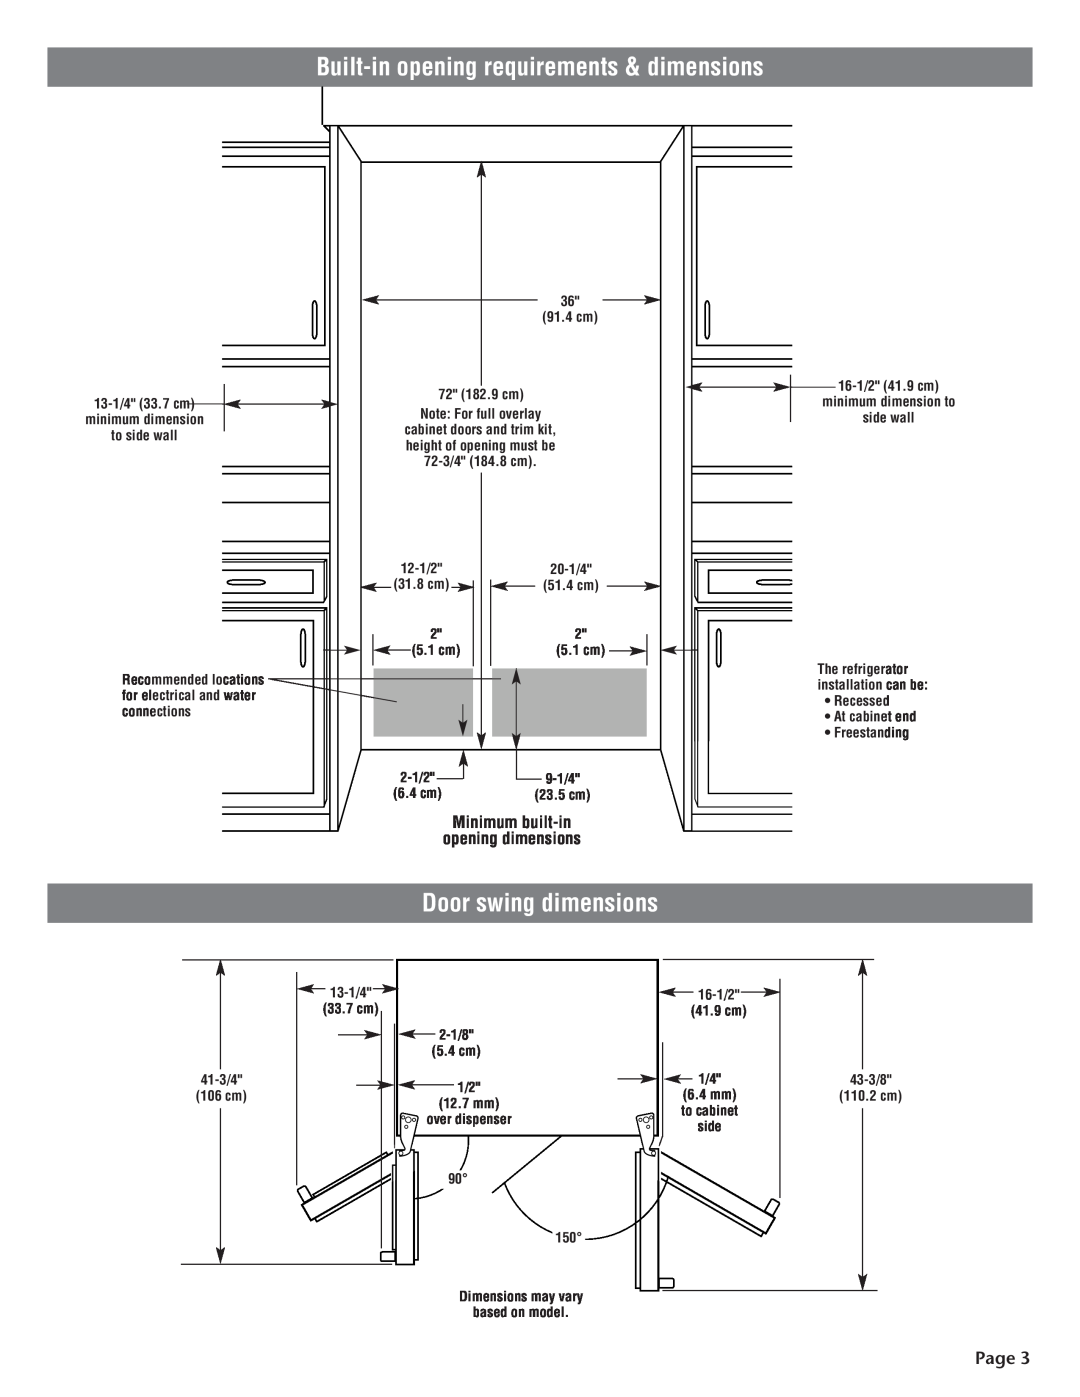 KitchenAid 2210725 manual Door swing dimensions, Built-in opening requirements & dimensions, Page 